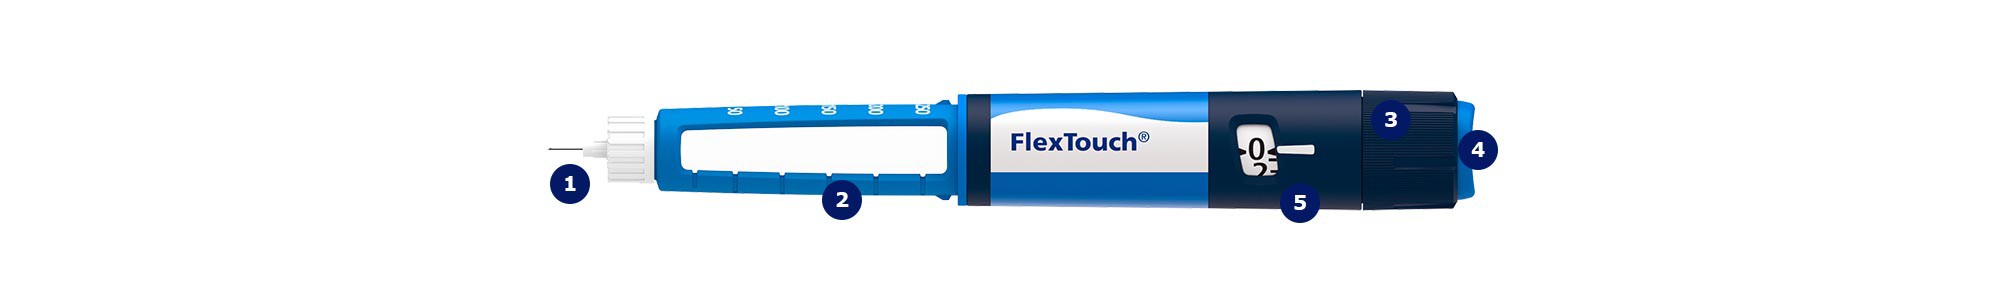 Differences Between FlexTouch™, GentleTouch™, and SoftTouch™ vinyls